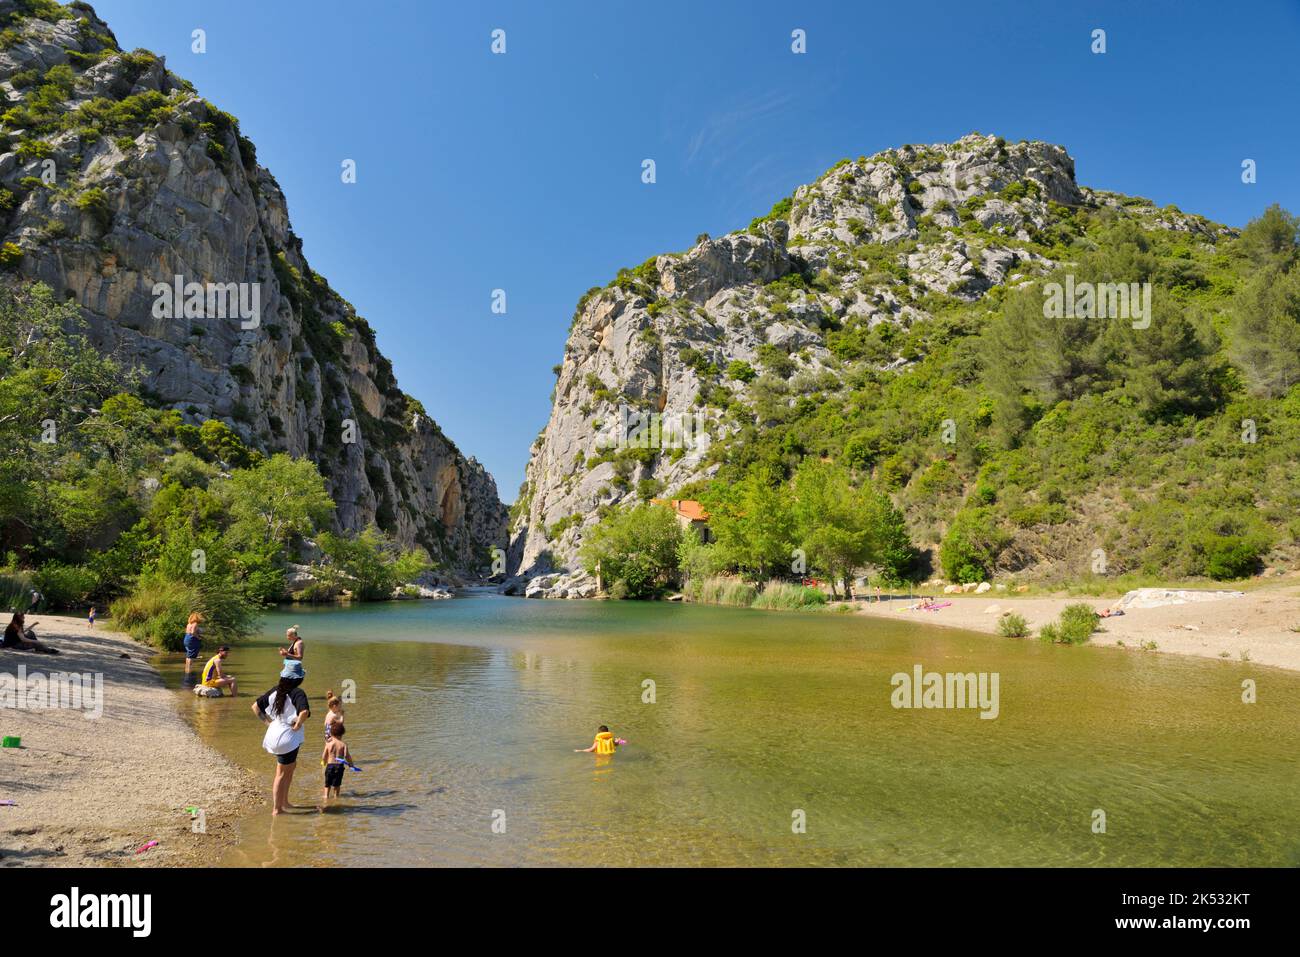 France, Pyrenees Orientales, Tautavel, The Gorges du Gouleyrous and the Verdouble River overlooked by the caune de l'Arago, the famous cave where the Stock Photo